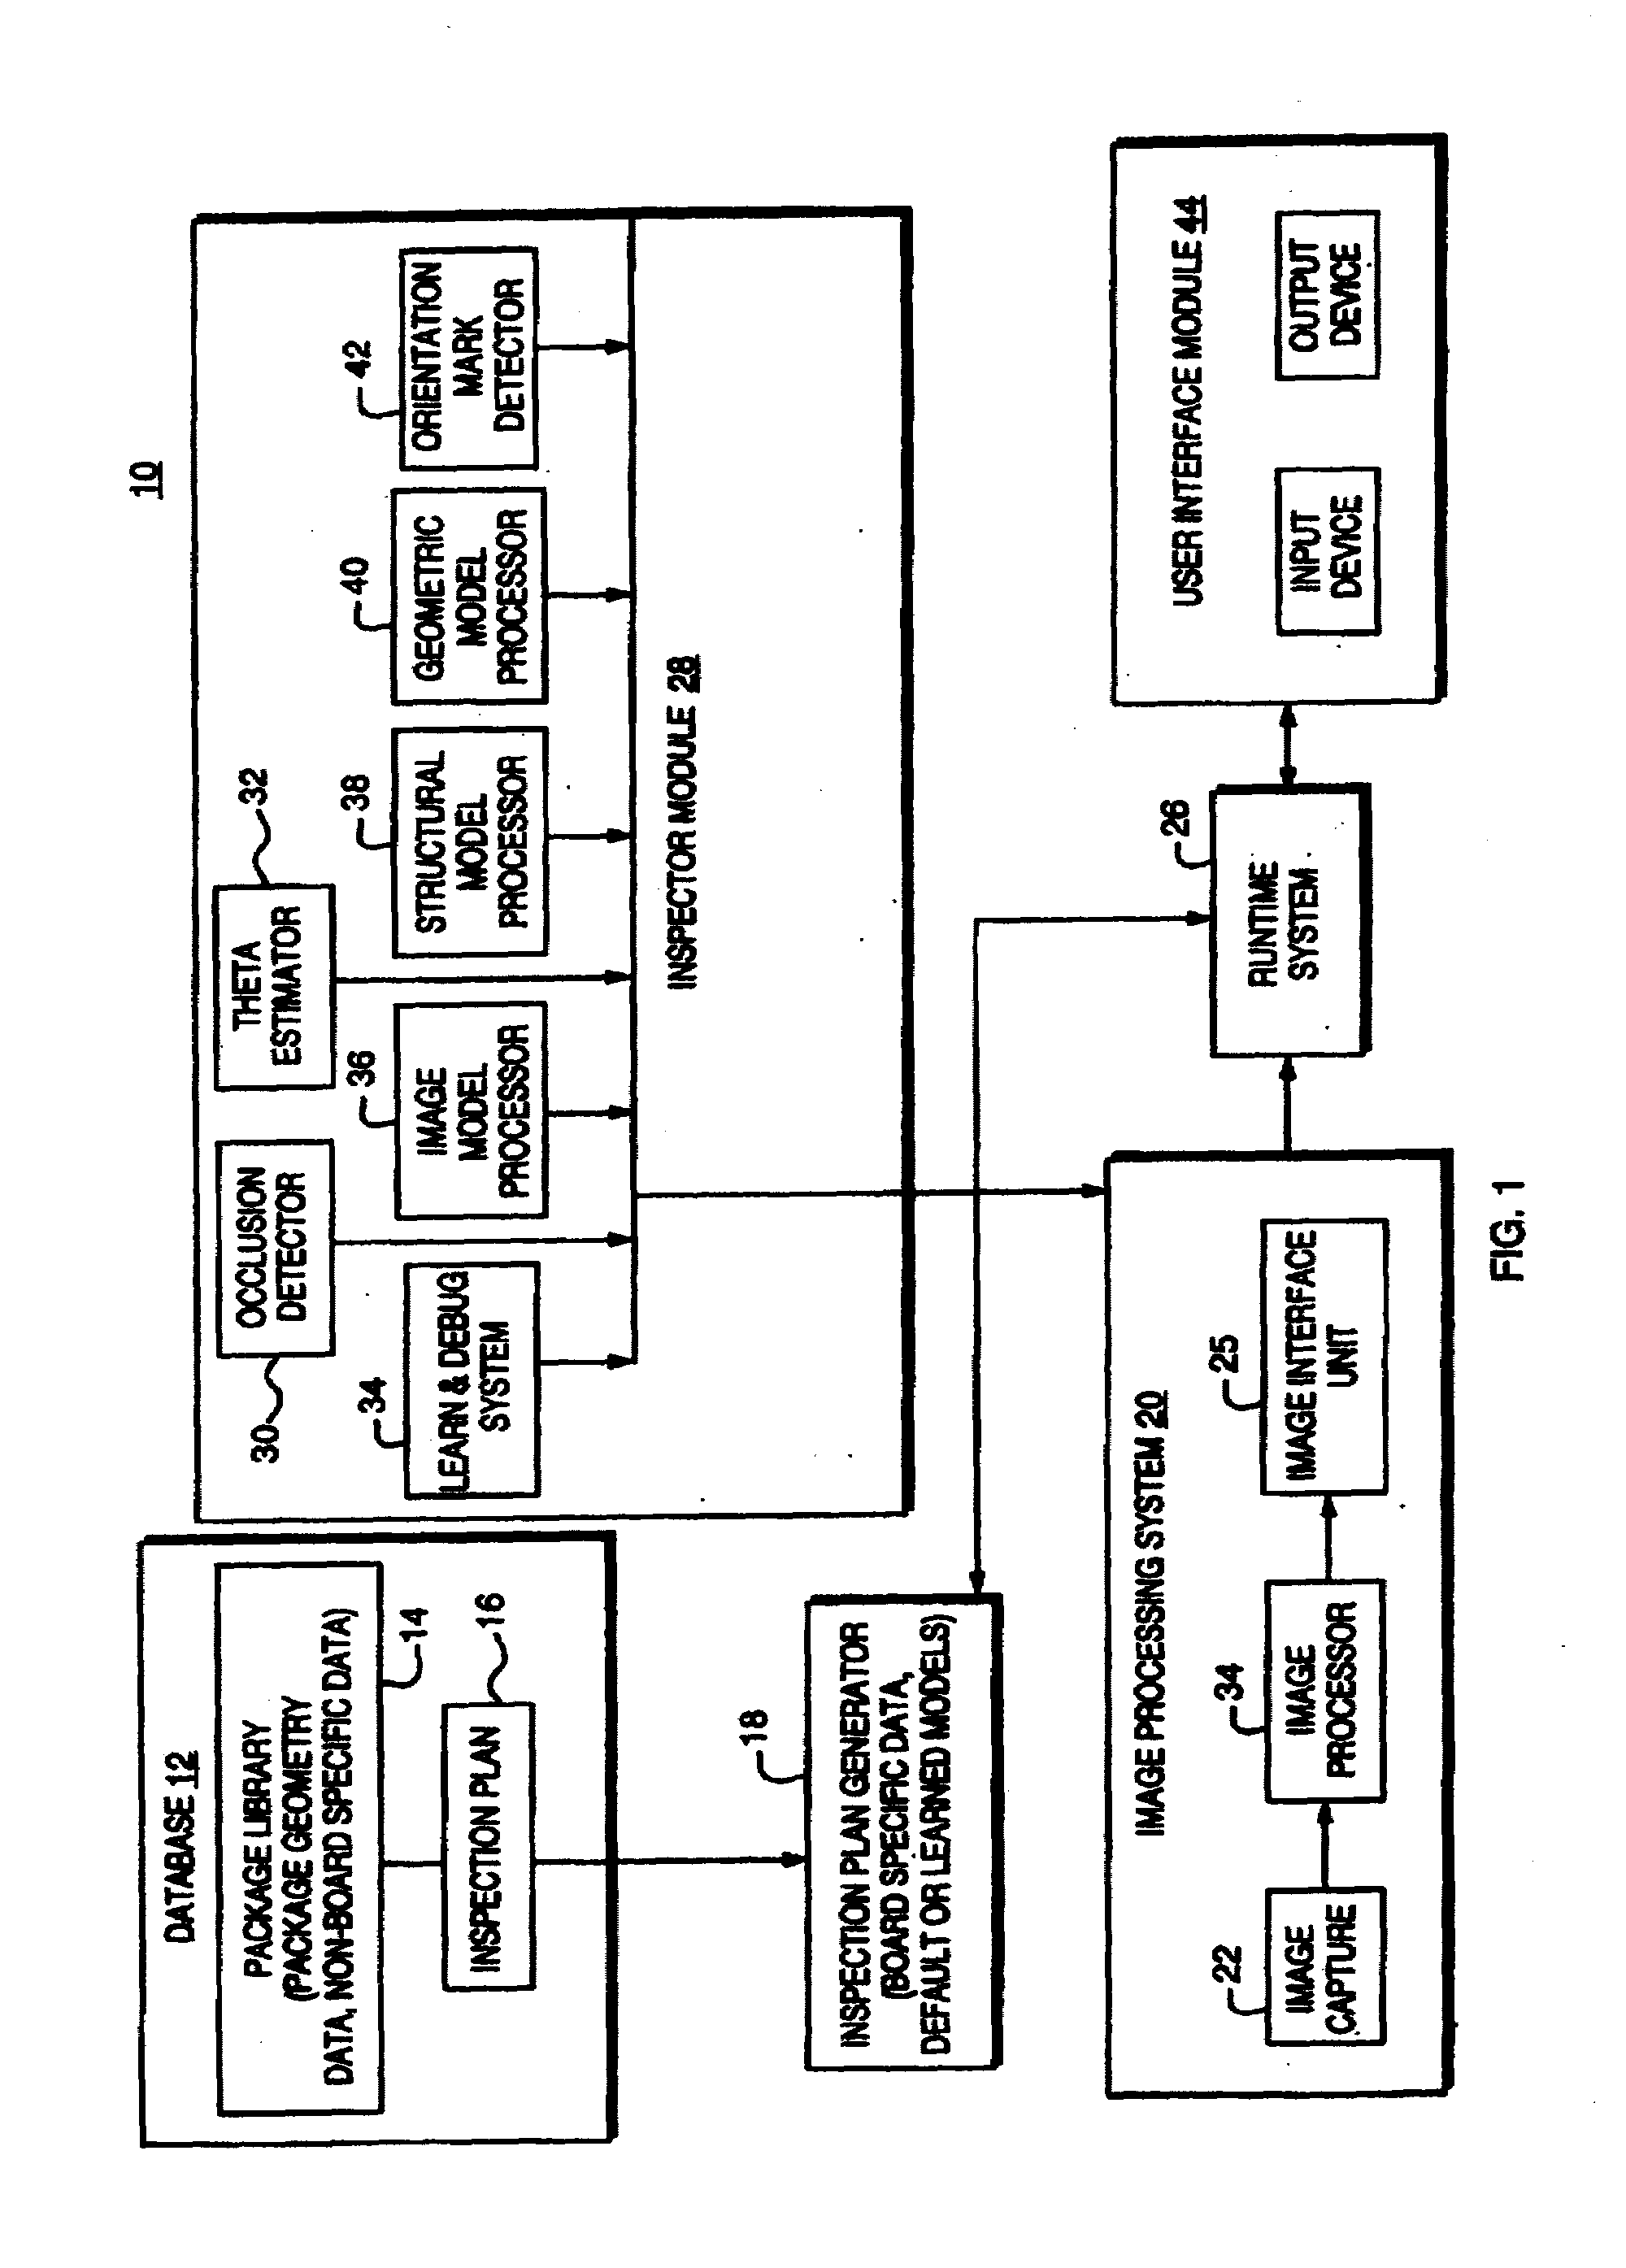 Image processing system for use with inspection systems